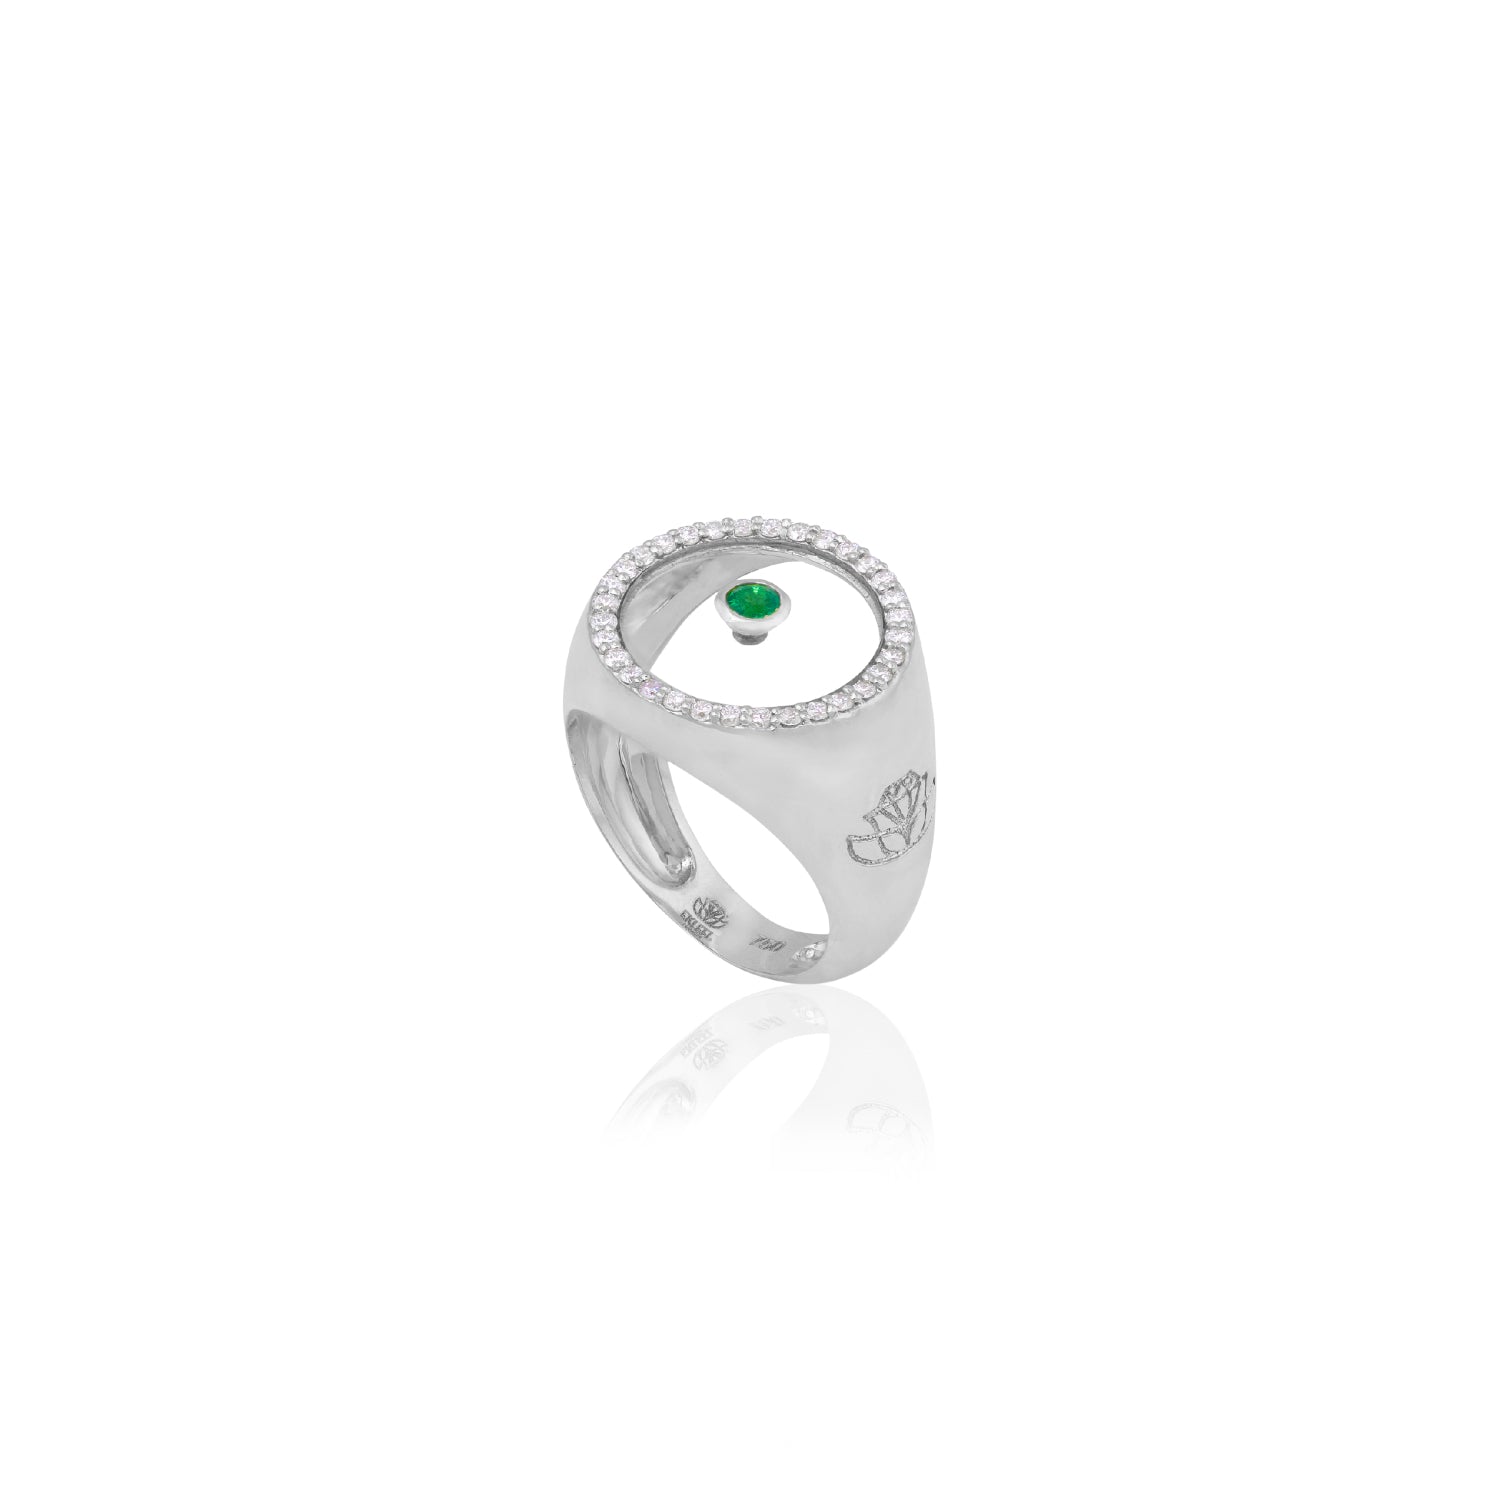 Emerald May Birthstone Ring in White Gold